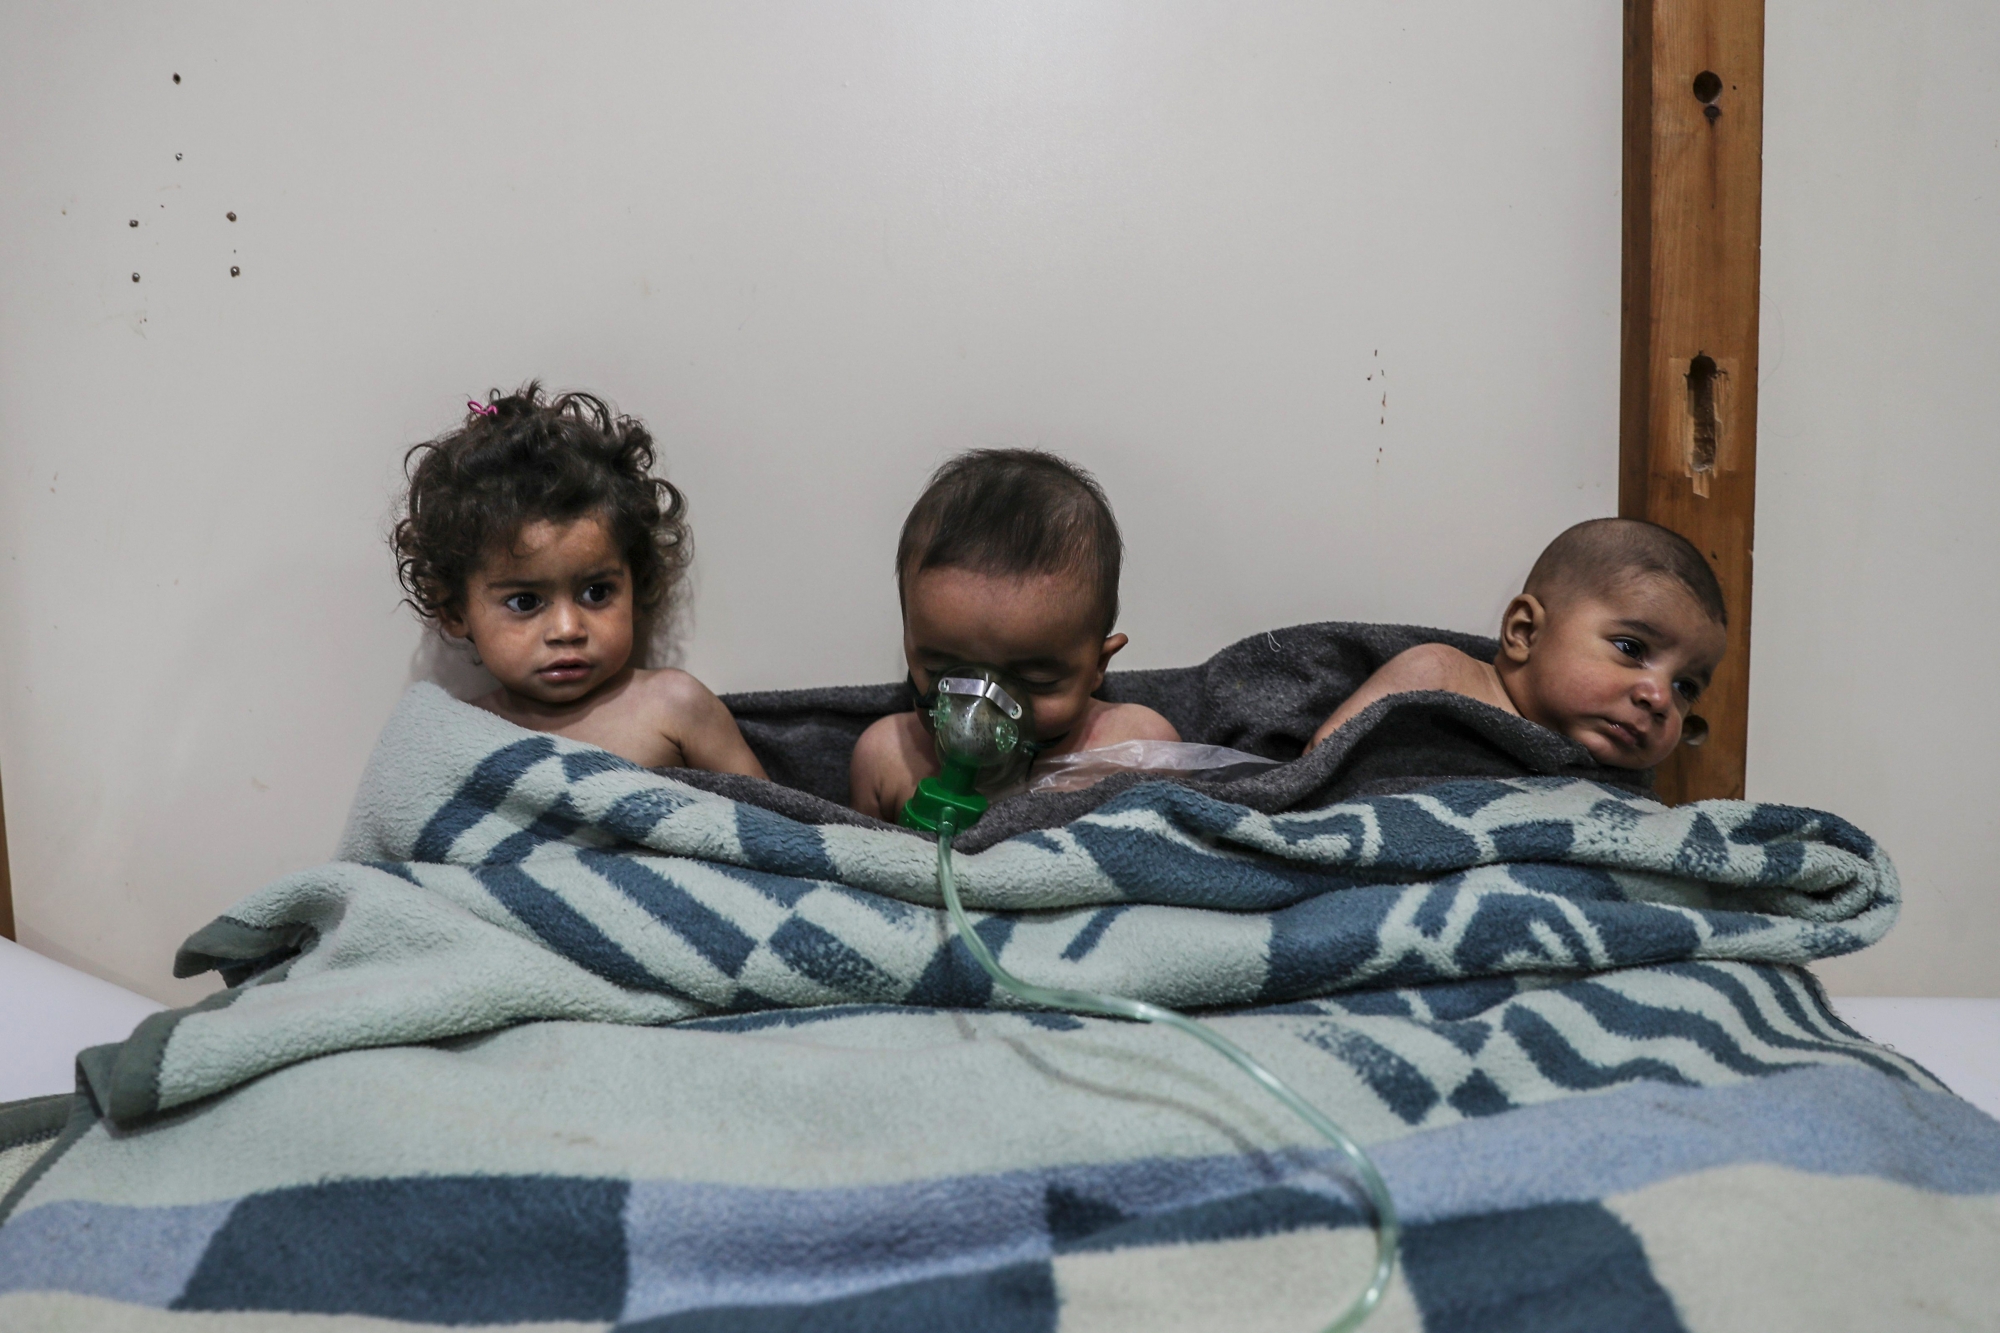 epa06565548 Affected children receive treatment after a gas attack on al-Shifunieh village, in Eastern Ghouta, Syria, 25 February 2018 (issued 26 February 2018). According to activists working in the area, more than 18 people were affected by poisenous gas, and one child was killed, during an attack on the village of al-Shifunieh. Government forces loyal to President Bashar al-Assad are currently conducting an air and ground offensive in Eastern Ghouta. The offensive was initiated soon after the United Nations passed a resolution calling for a 30-day cessation of hostilities in Syria.  EPA/MOHAMMED BADRA SYRIA CONFLICT